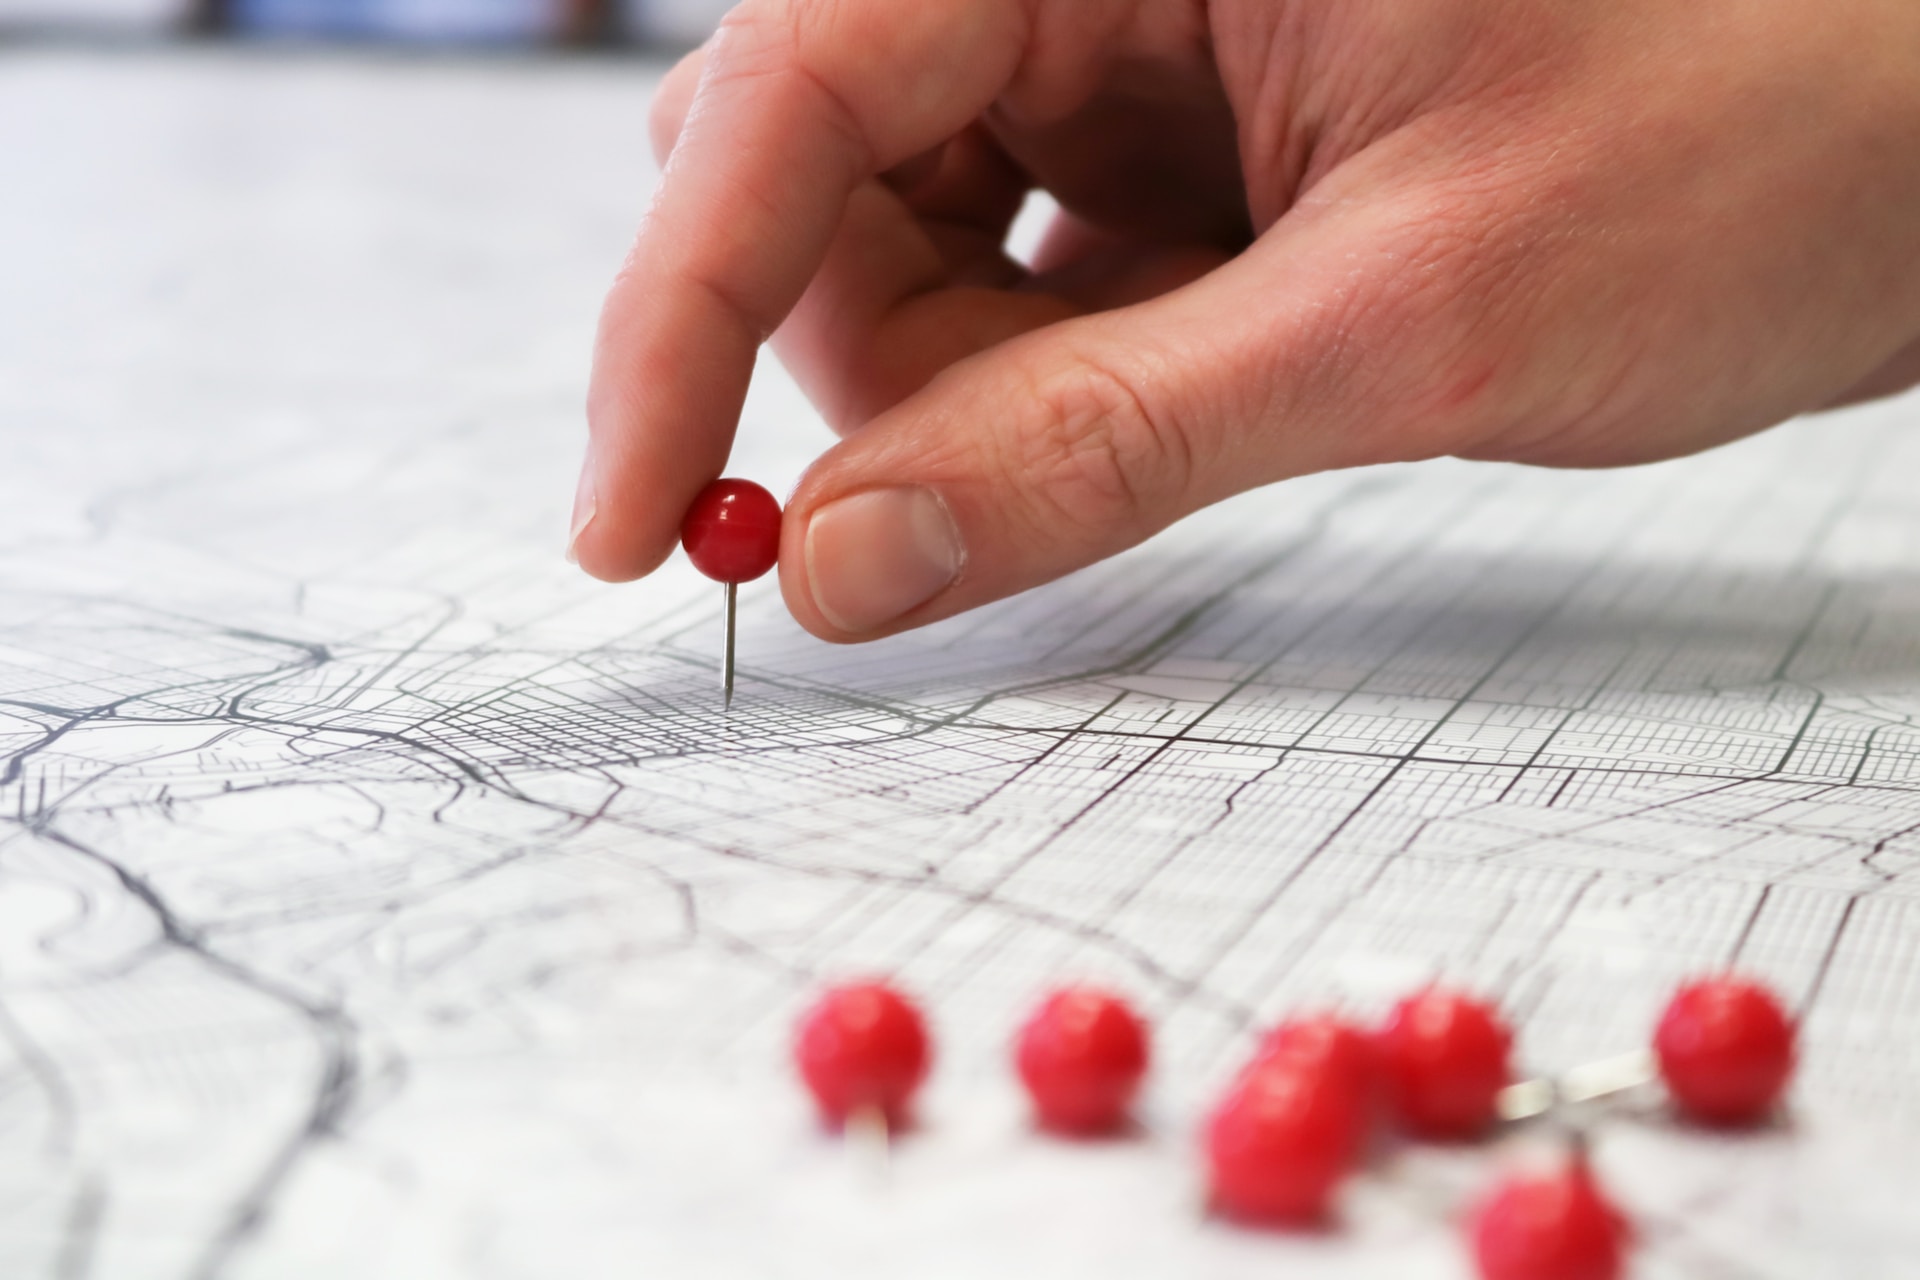 Pins being added to a paper map